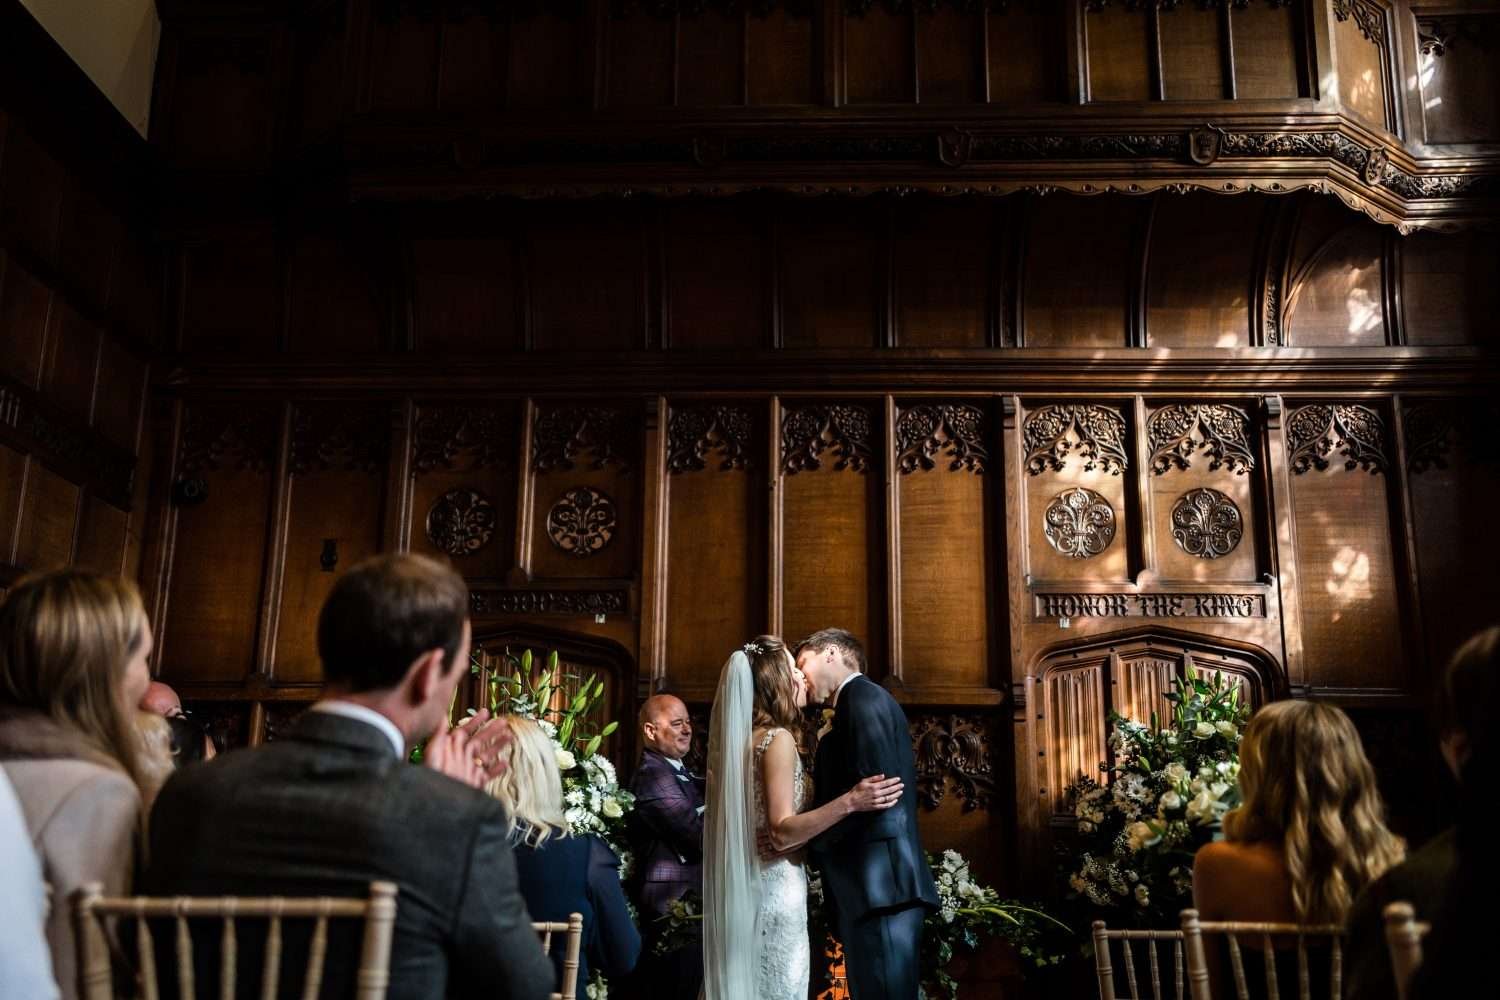 A bride and groom kiss as their wedding ceremony comes to an end in a sunlight wood panelled elizabethan room at hengrave hall in suffolk